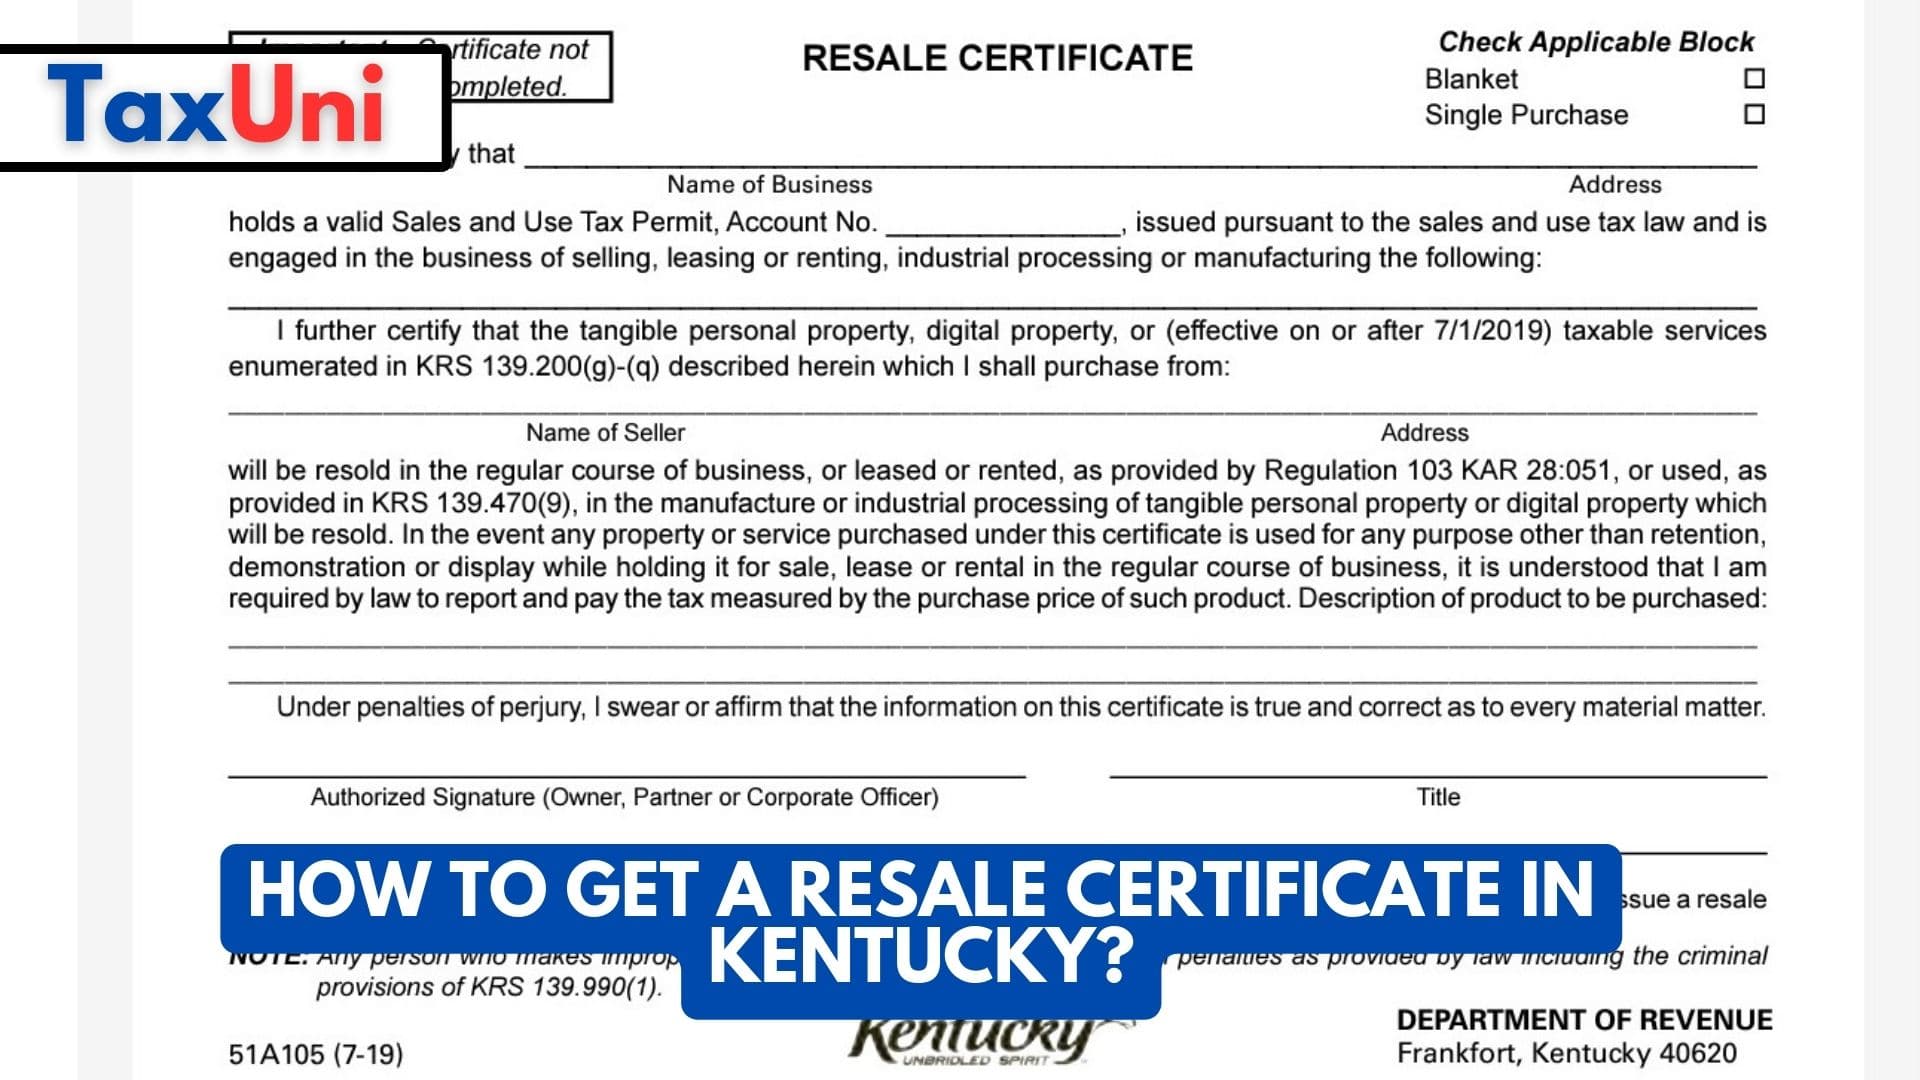 How to Get a Resale Certificate in Kentucky?